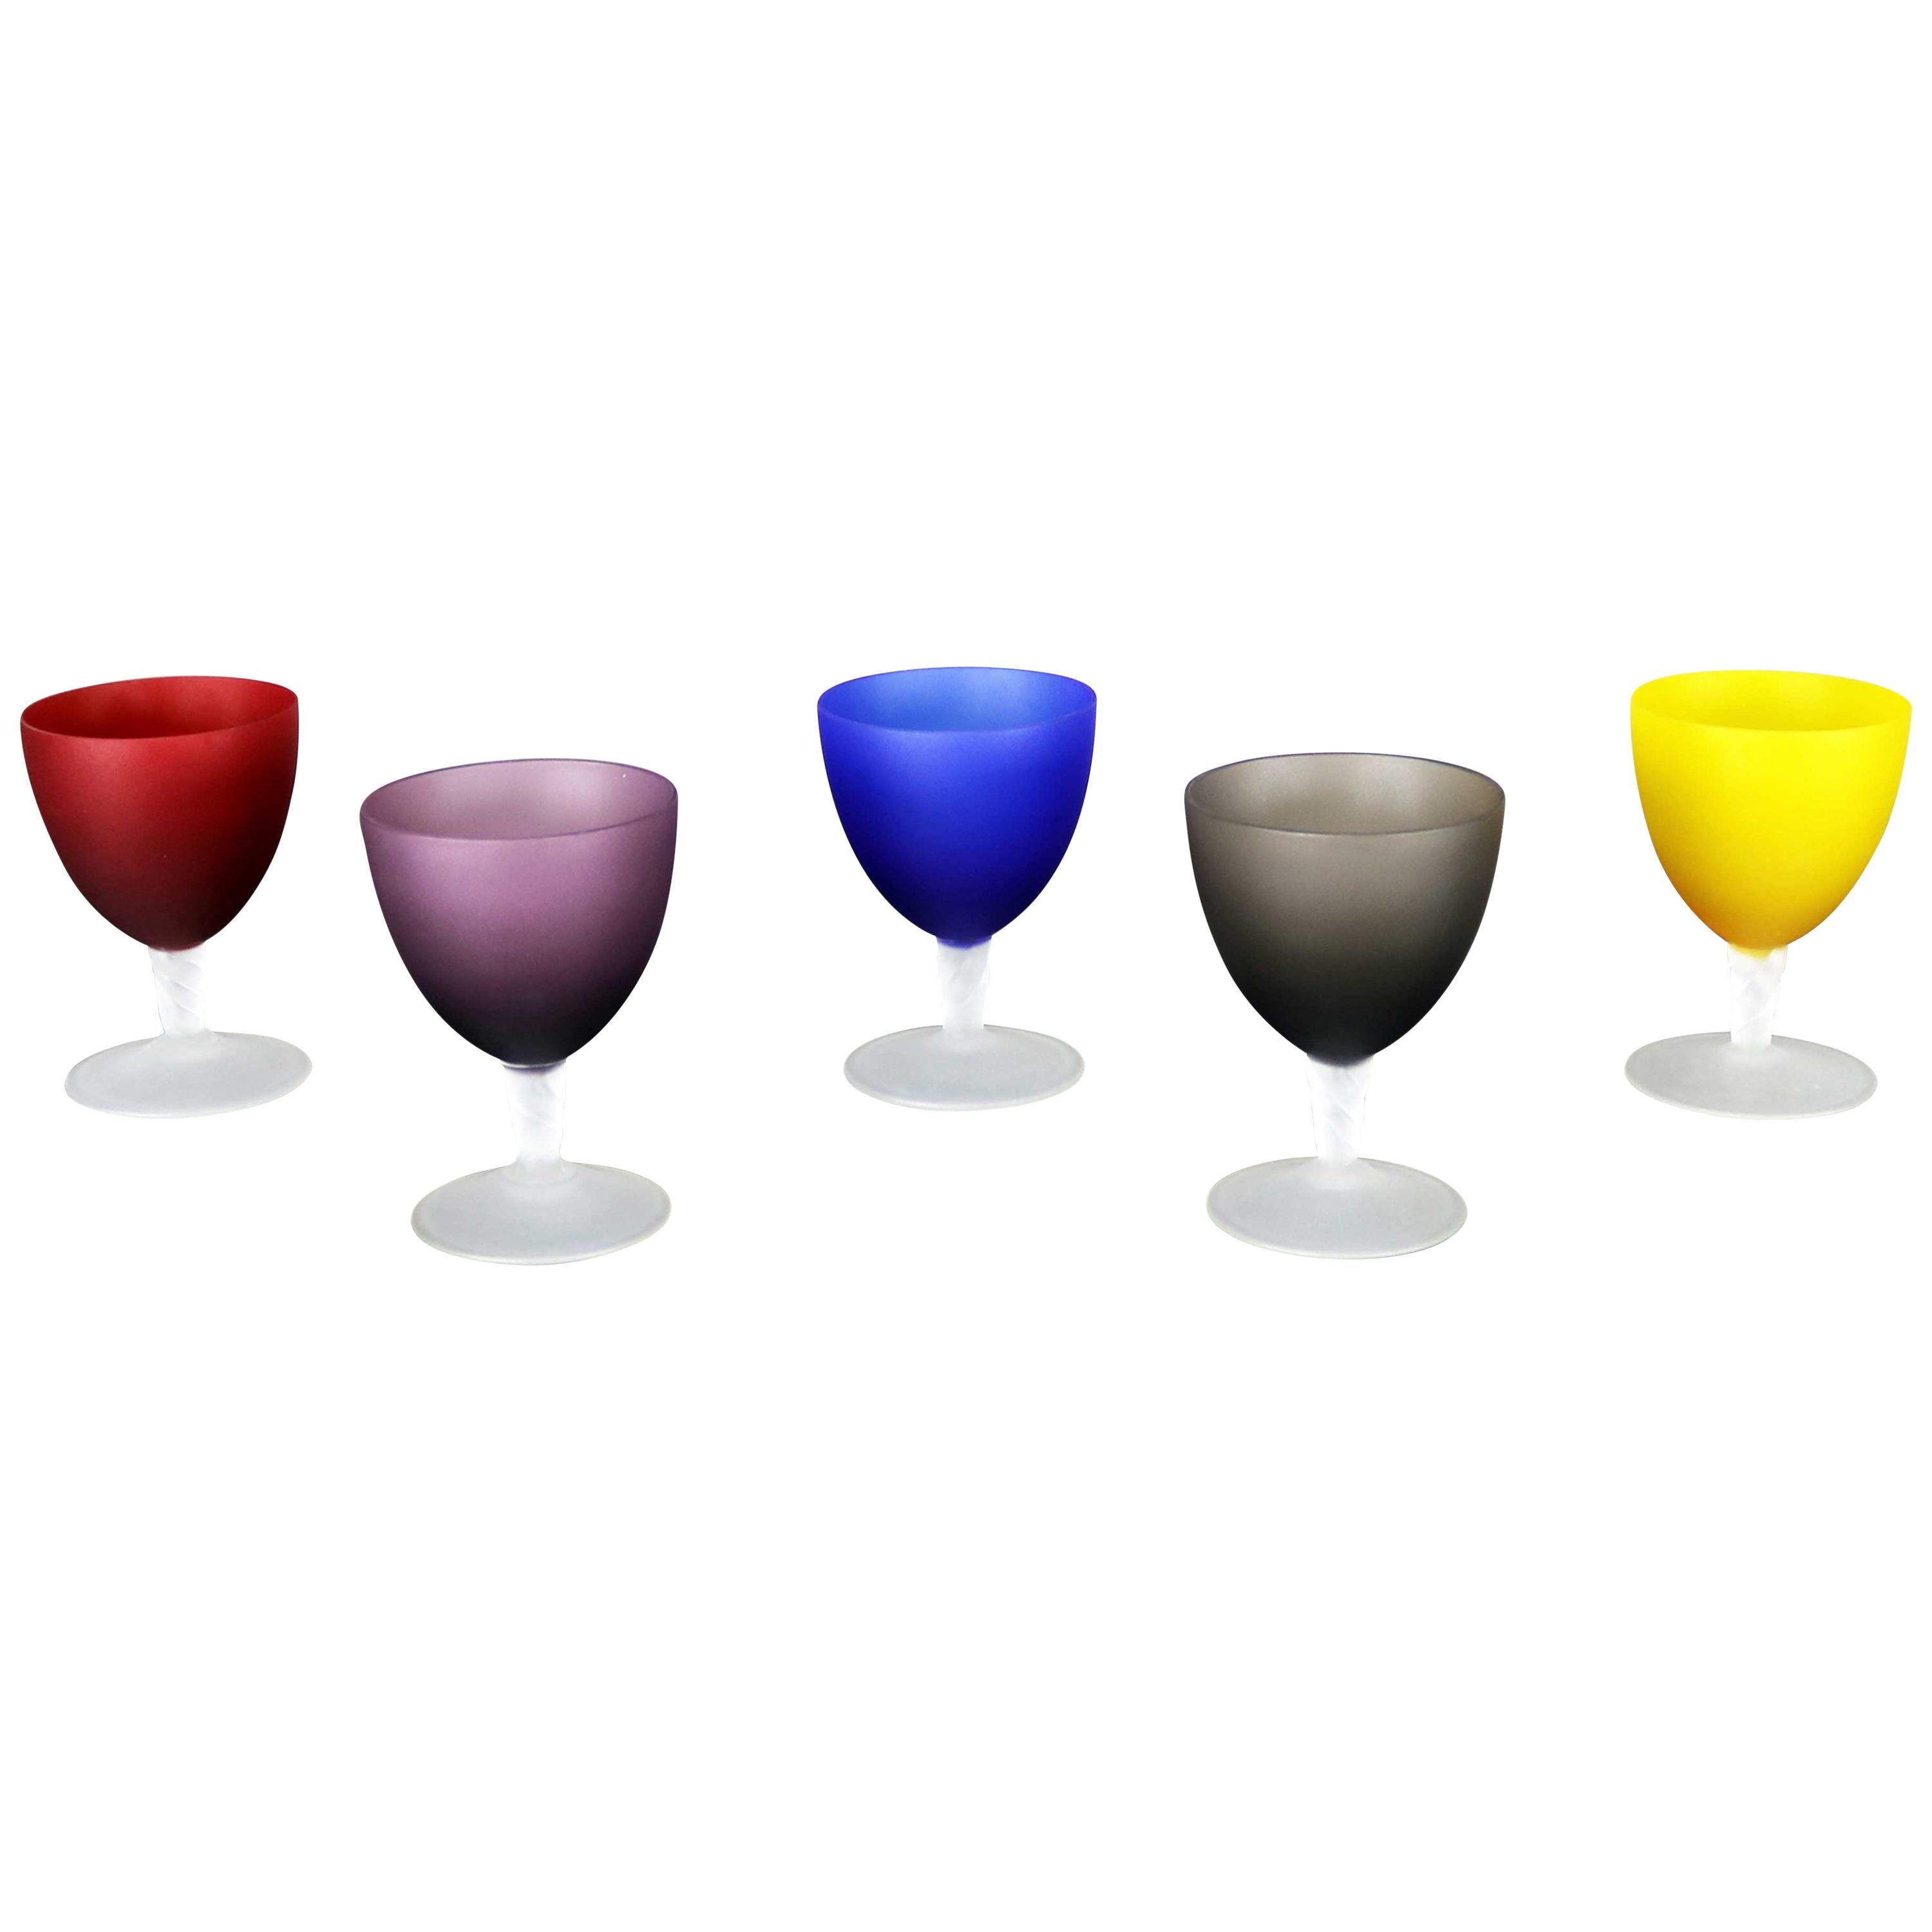 Set of 5 Small Multicolored Frosted Glass Wine Coupes or Cordial Glasses